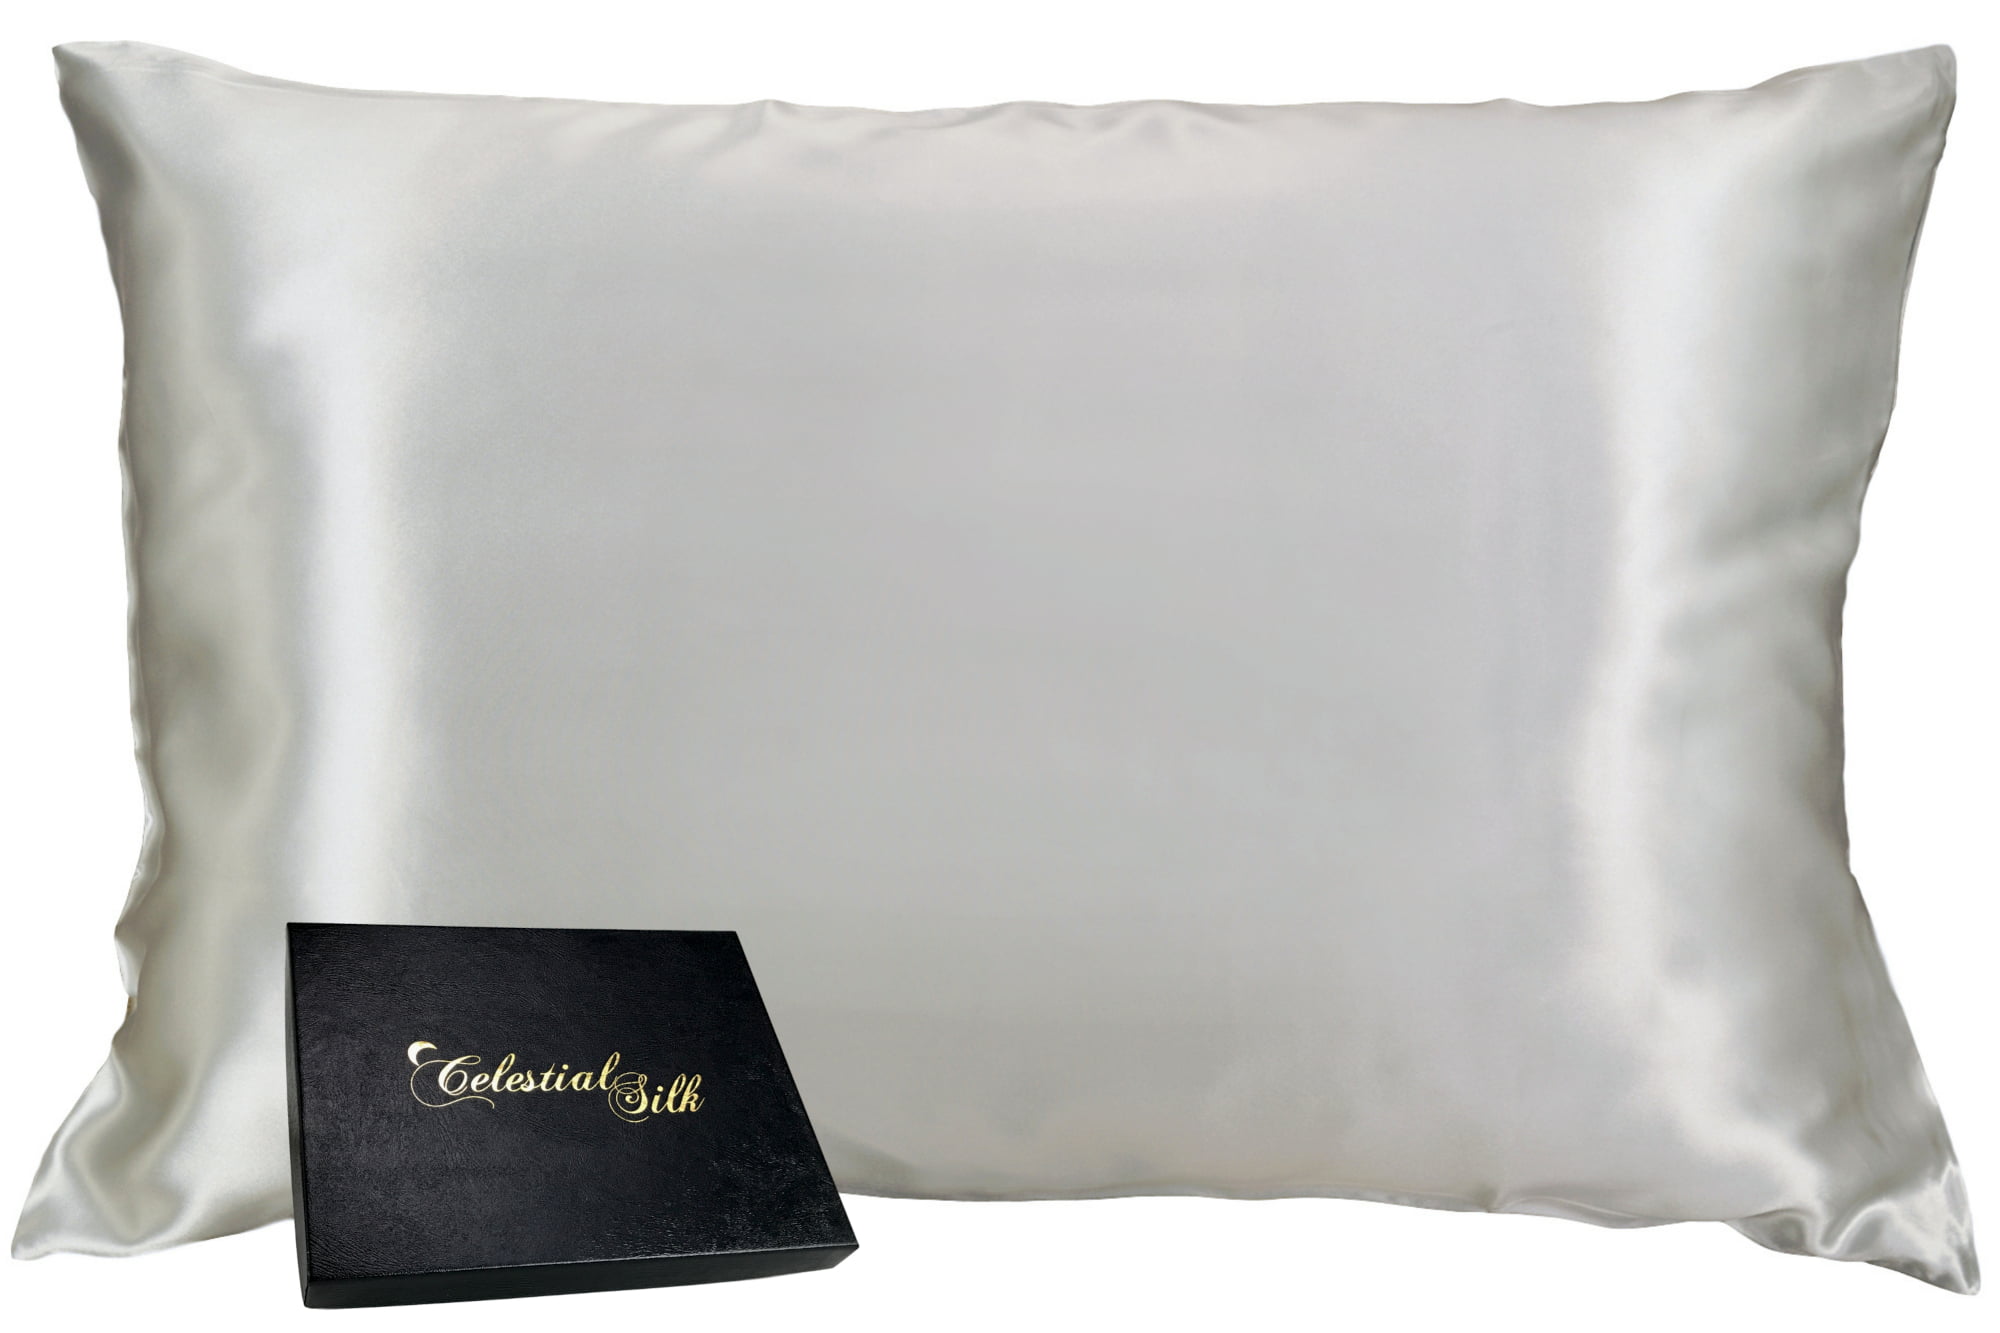 LilySilk Silk Pillowcase for Hair and Skin with Cotton Underside Standard 20x26 Inch White 1pc 19 Momme Gift Box